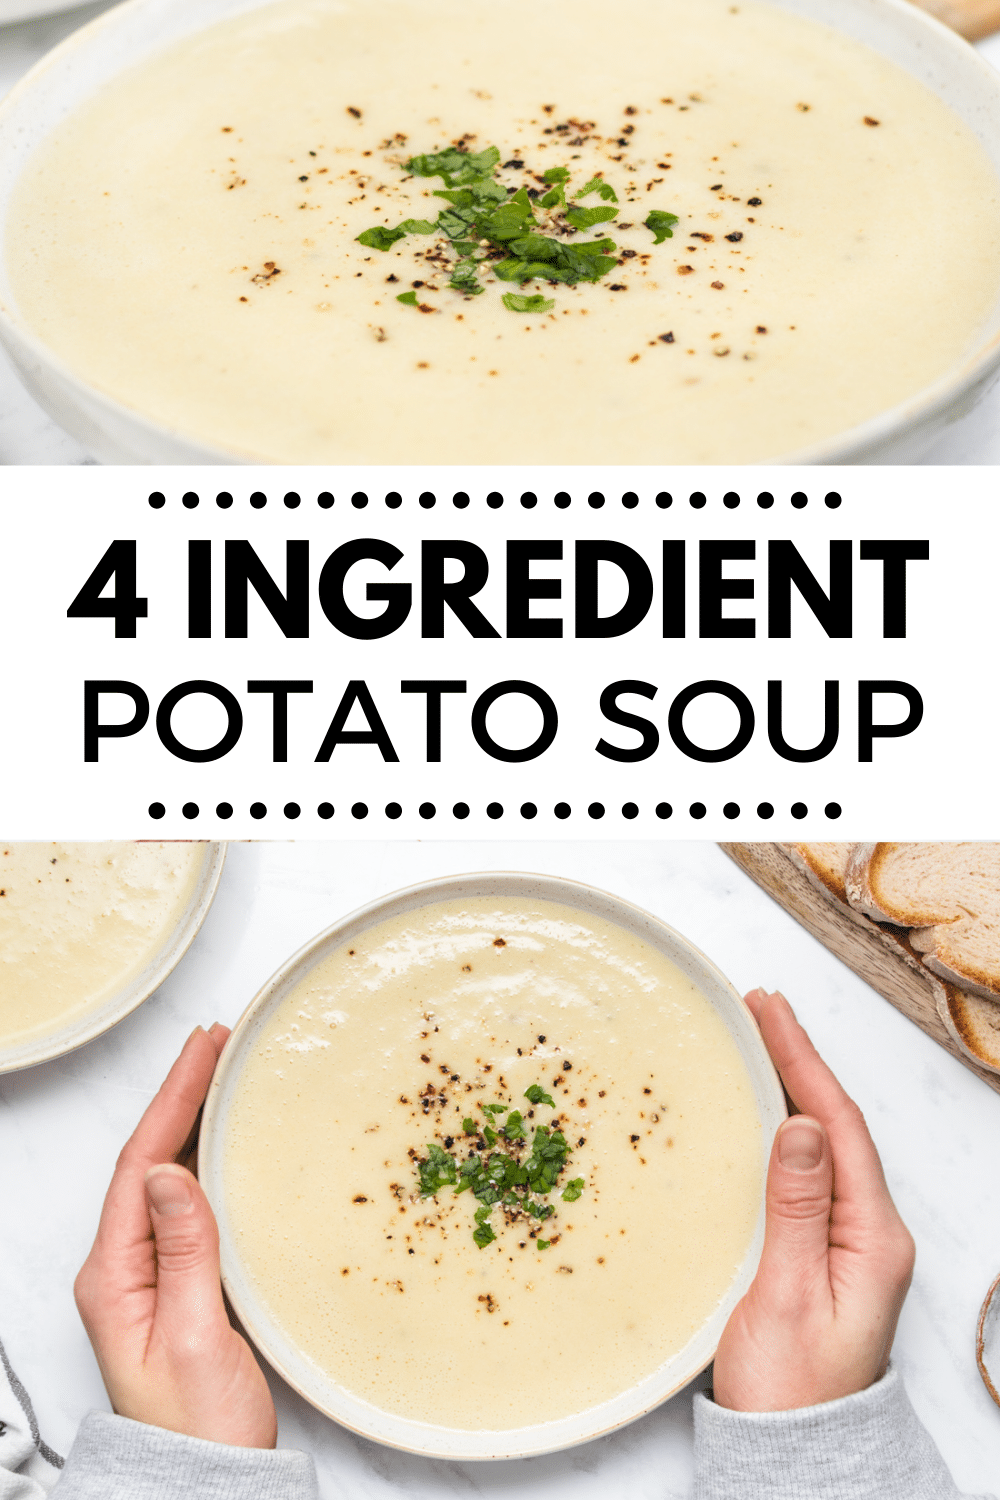 A 4 Ingredient Potato Soup Recipe that's ready in about 40 minutes! This simple soup recipe will warm your belly with comforting flavors and textures, and it's so easy to make.